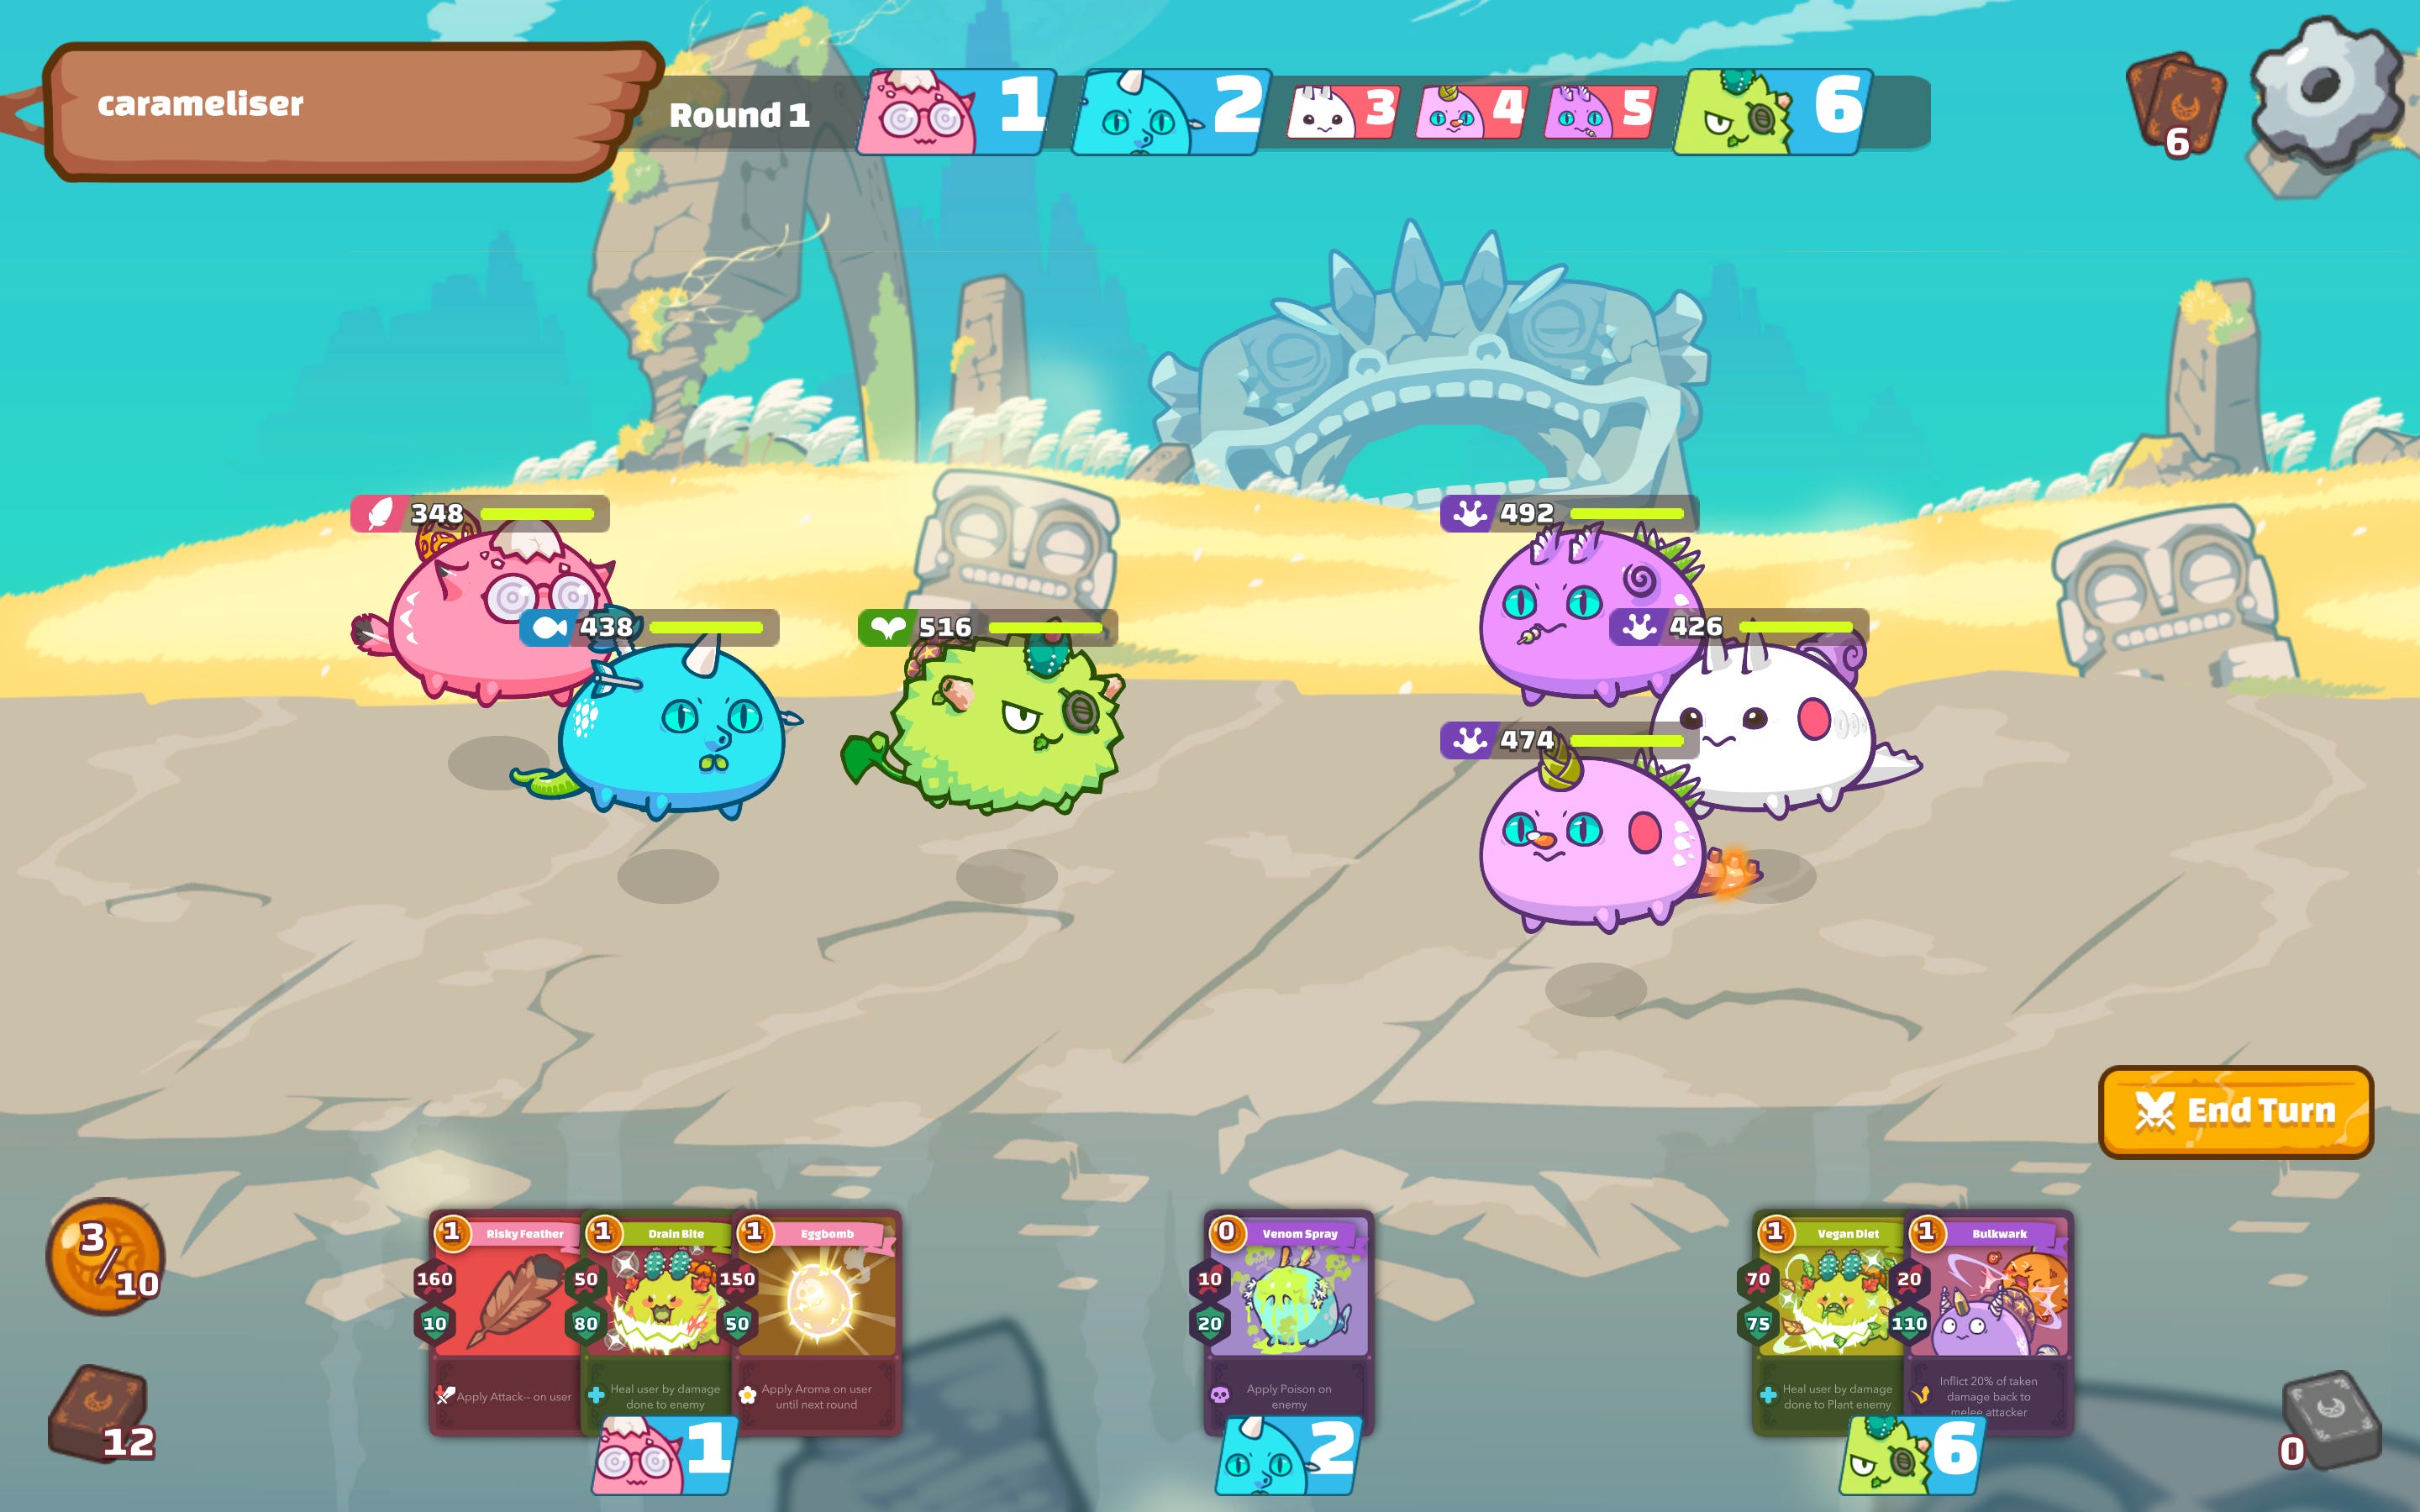 axie infinity guide